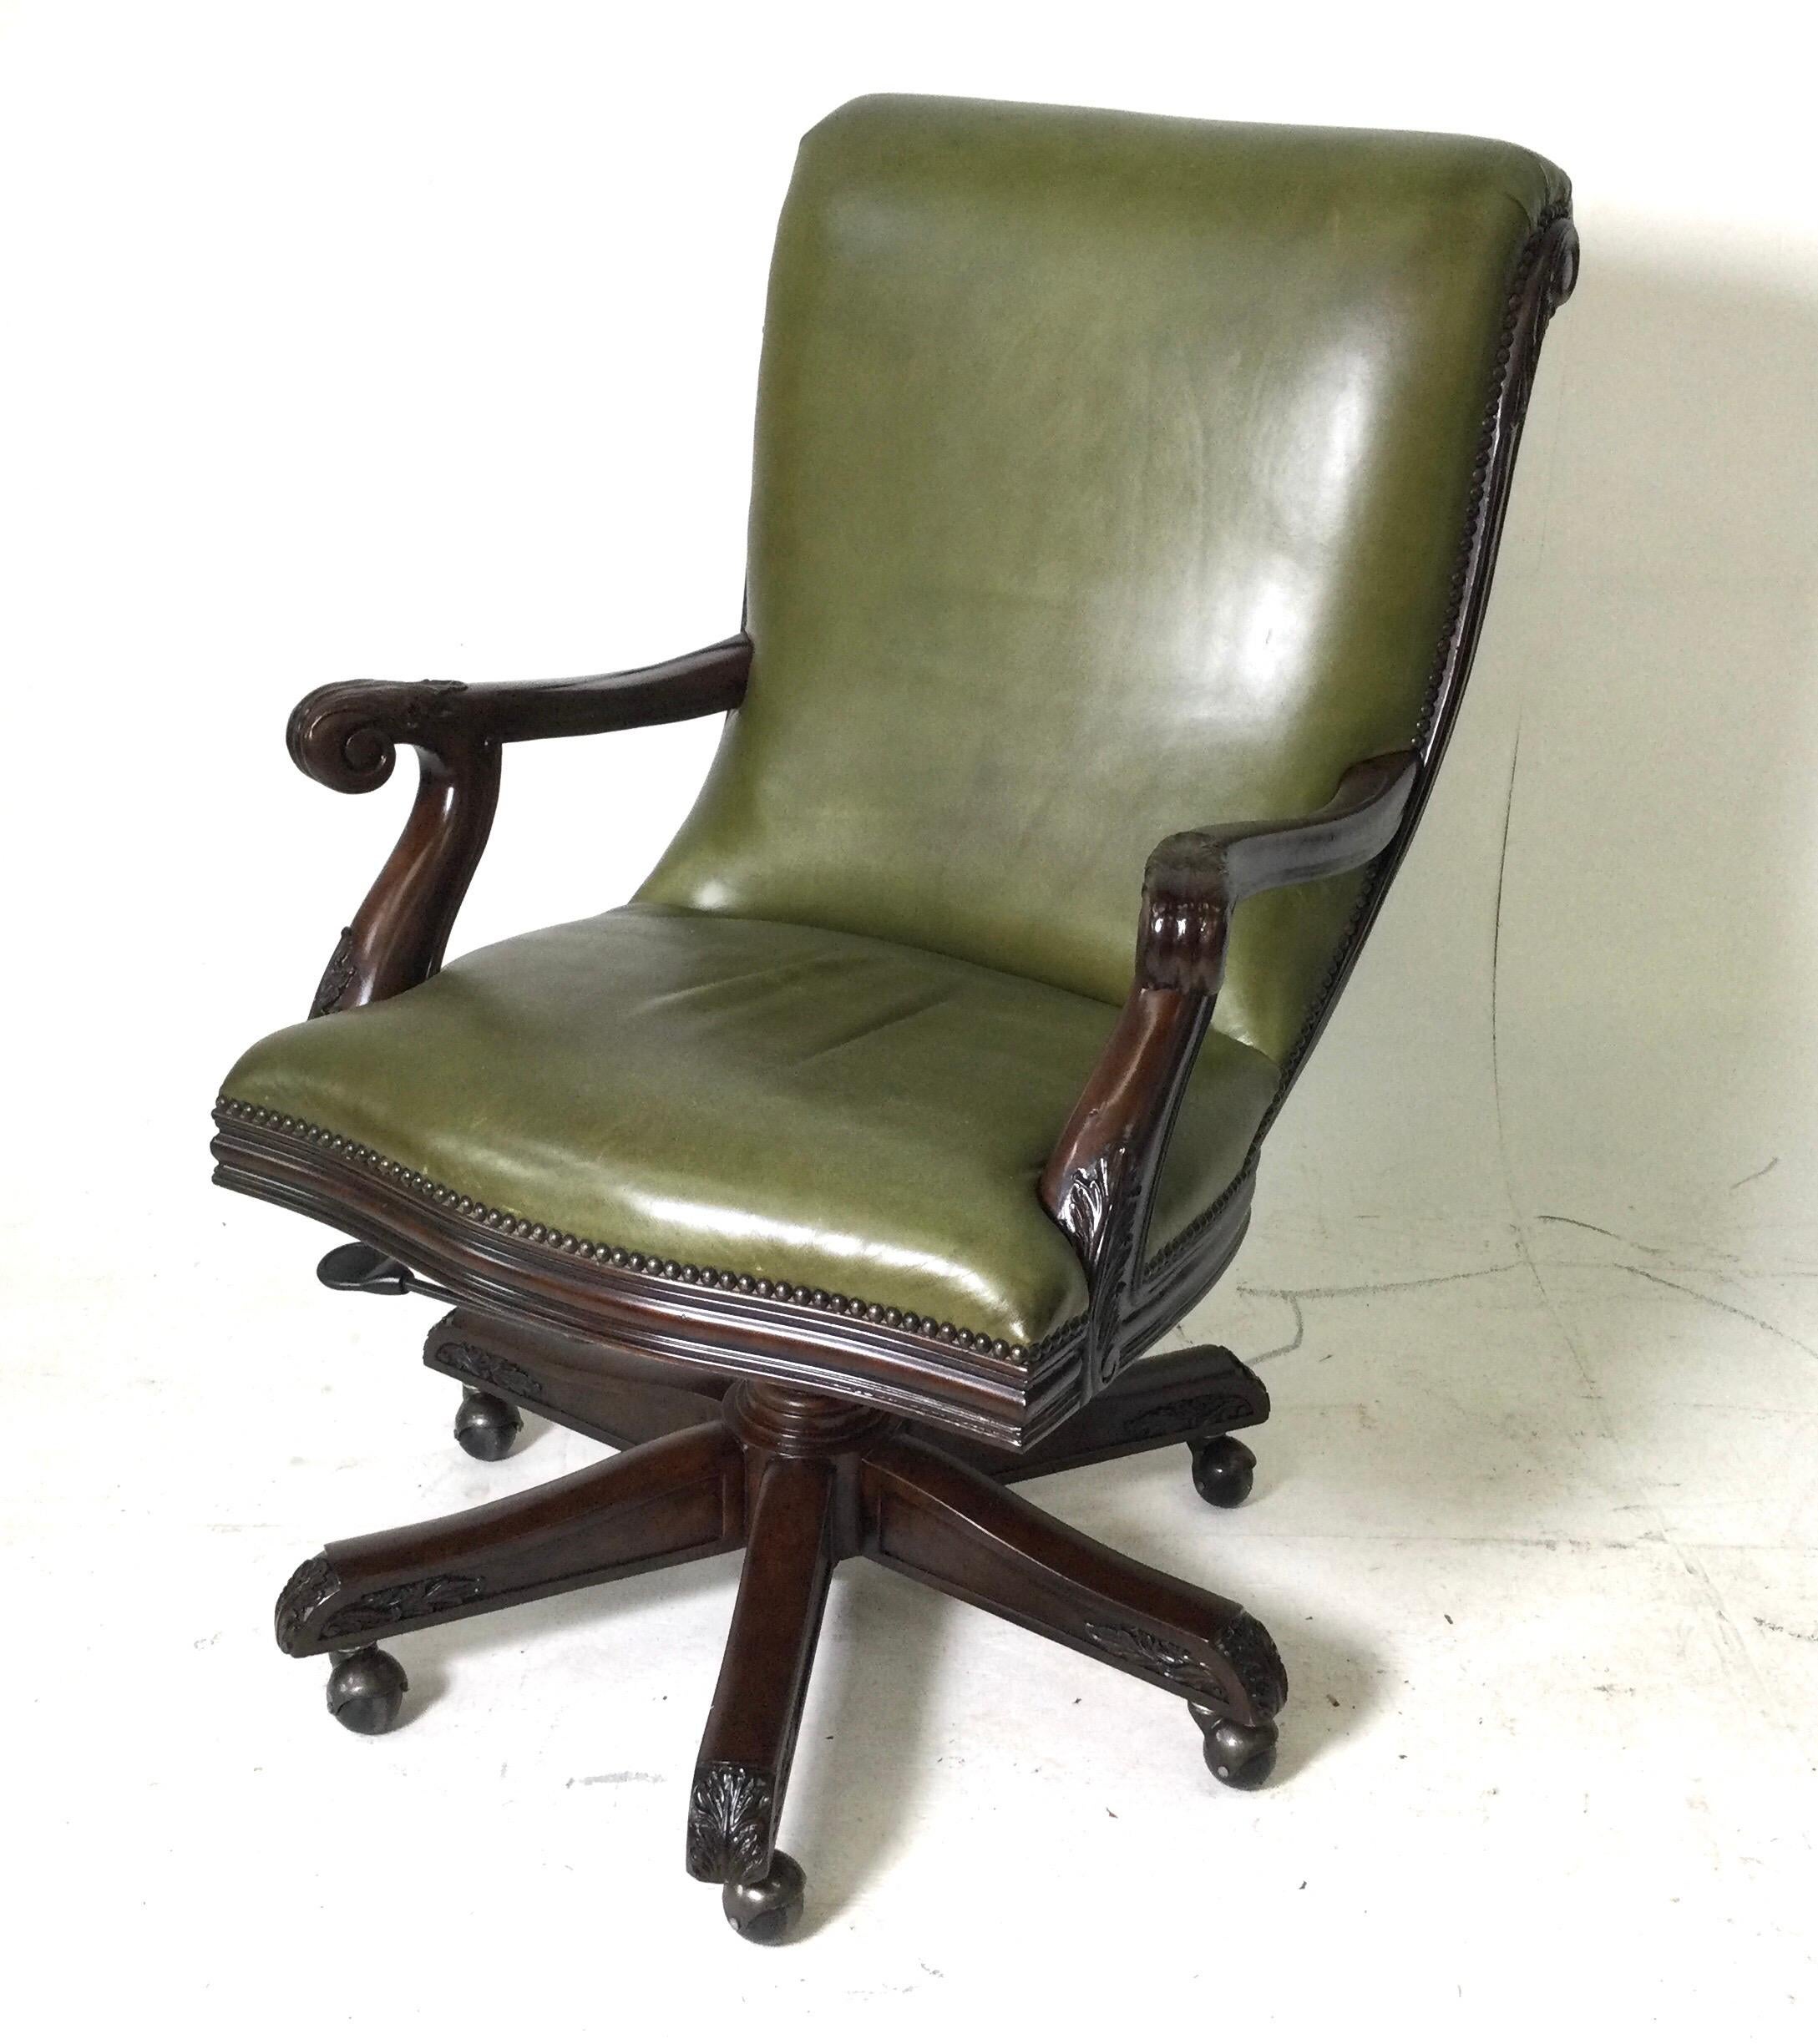 Beautifully carved Maitland Smith desk chair. The wood frame with caved acanthus leaves upholstered in an medium green leather with nail head trim ... The graceful rolled back with hand carved open arms, resting on six leg base with castors.